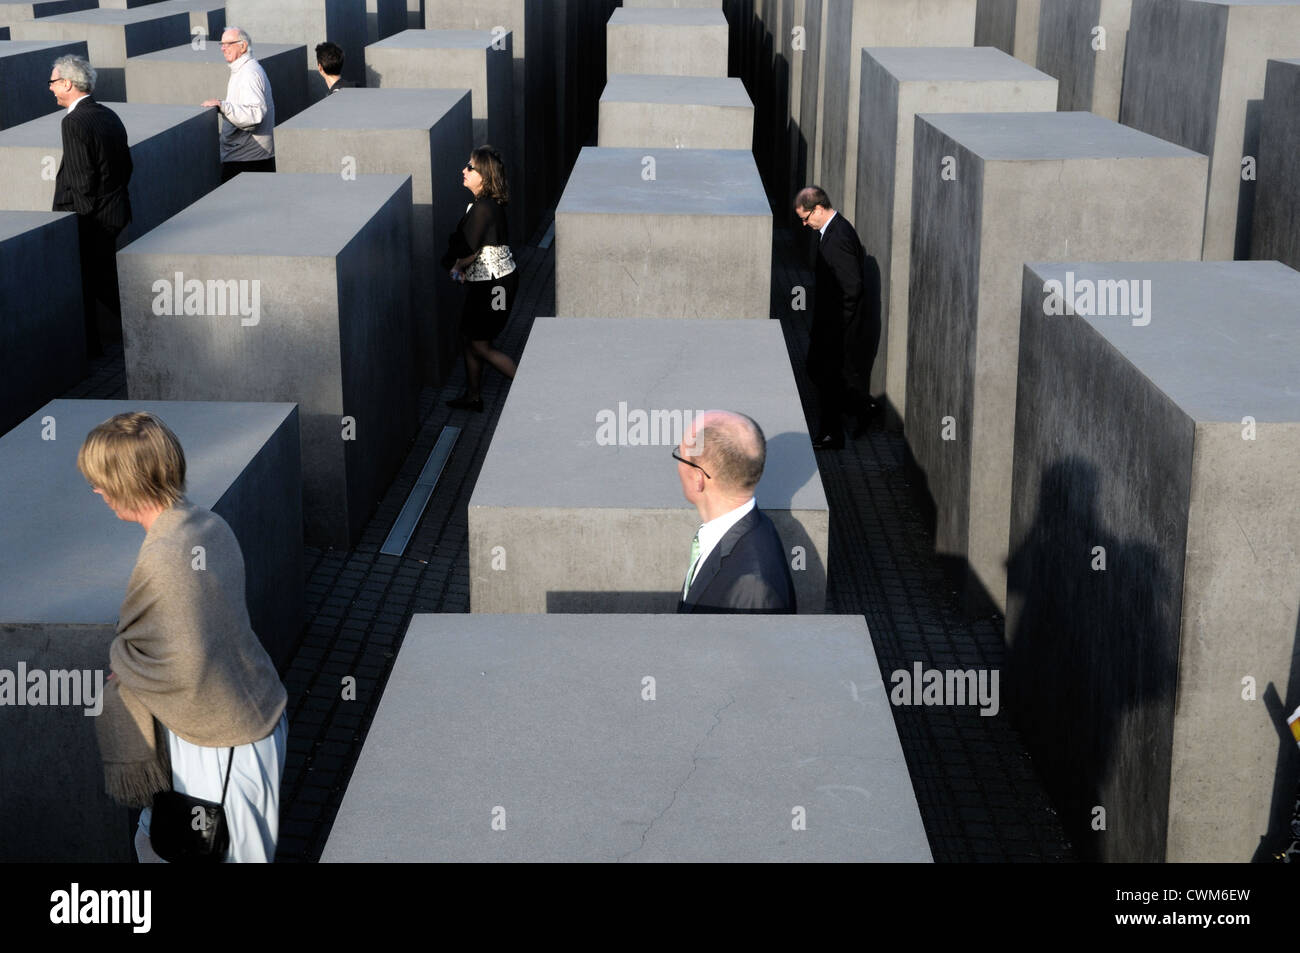 The Memorial to the Murdered Jews of Europe in Berlin, Germany. Stock Photo